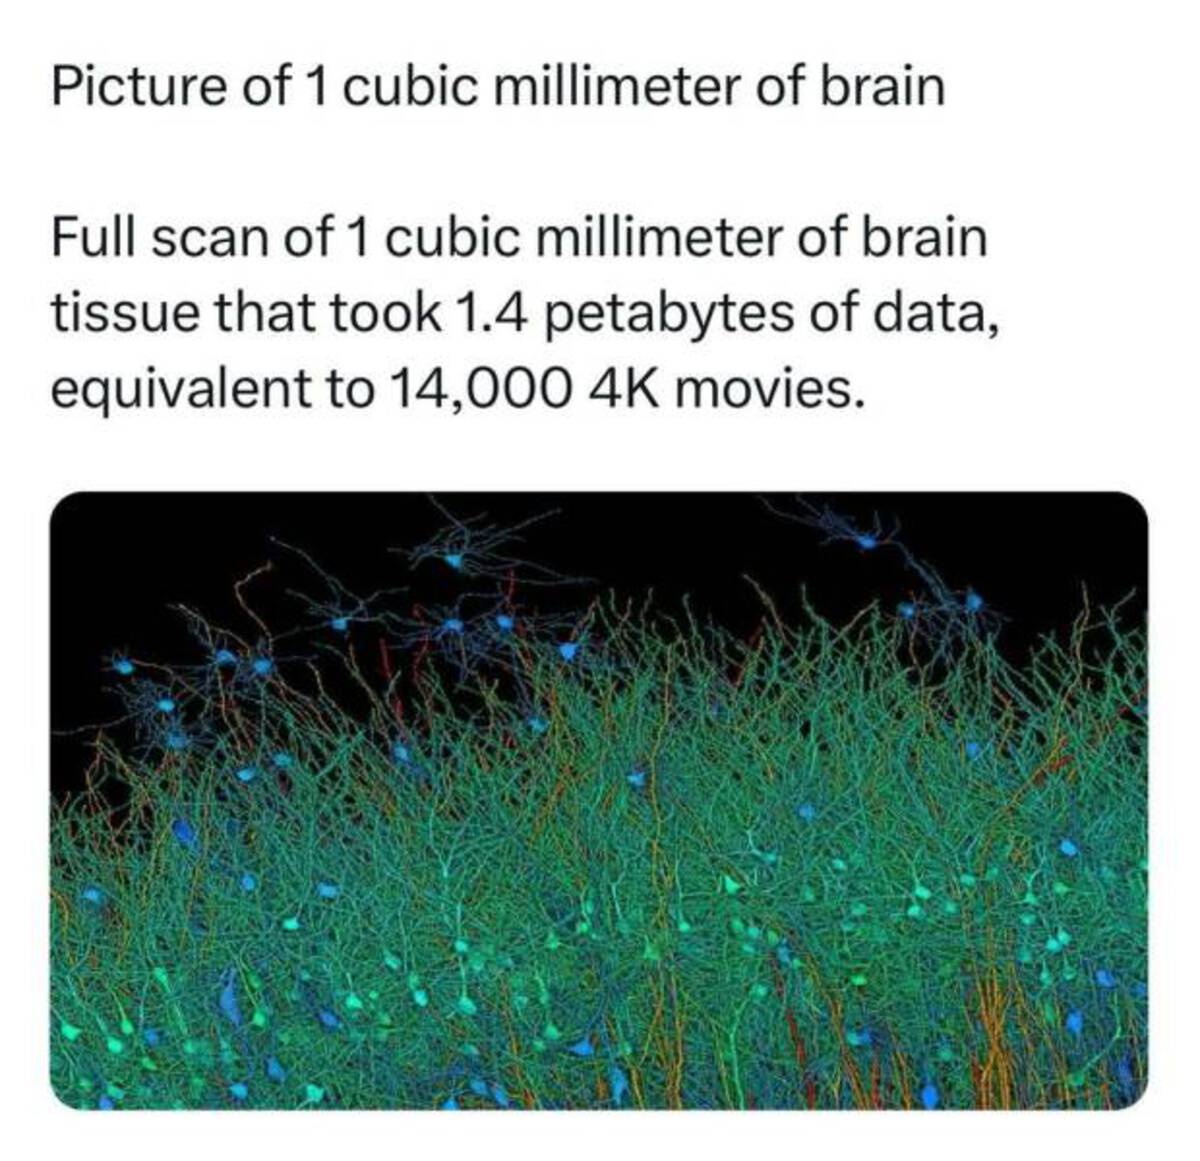 grass - Picture of 1 cubic millimeter of brain Full scan of 1 cubic millimeter of brain tissue that took 1.4 petabytes of data, equivalent to 14, movies.